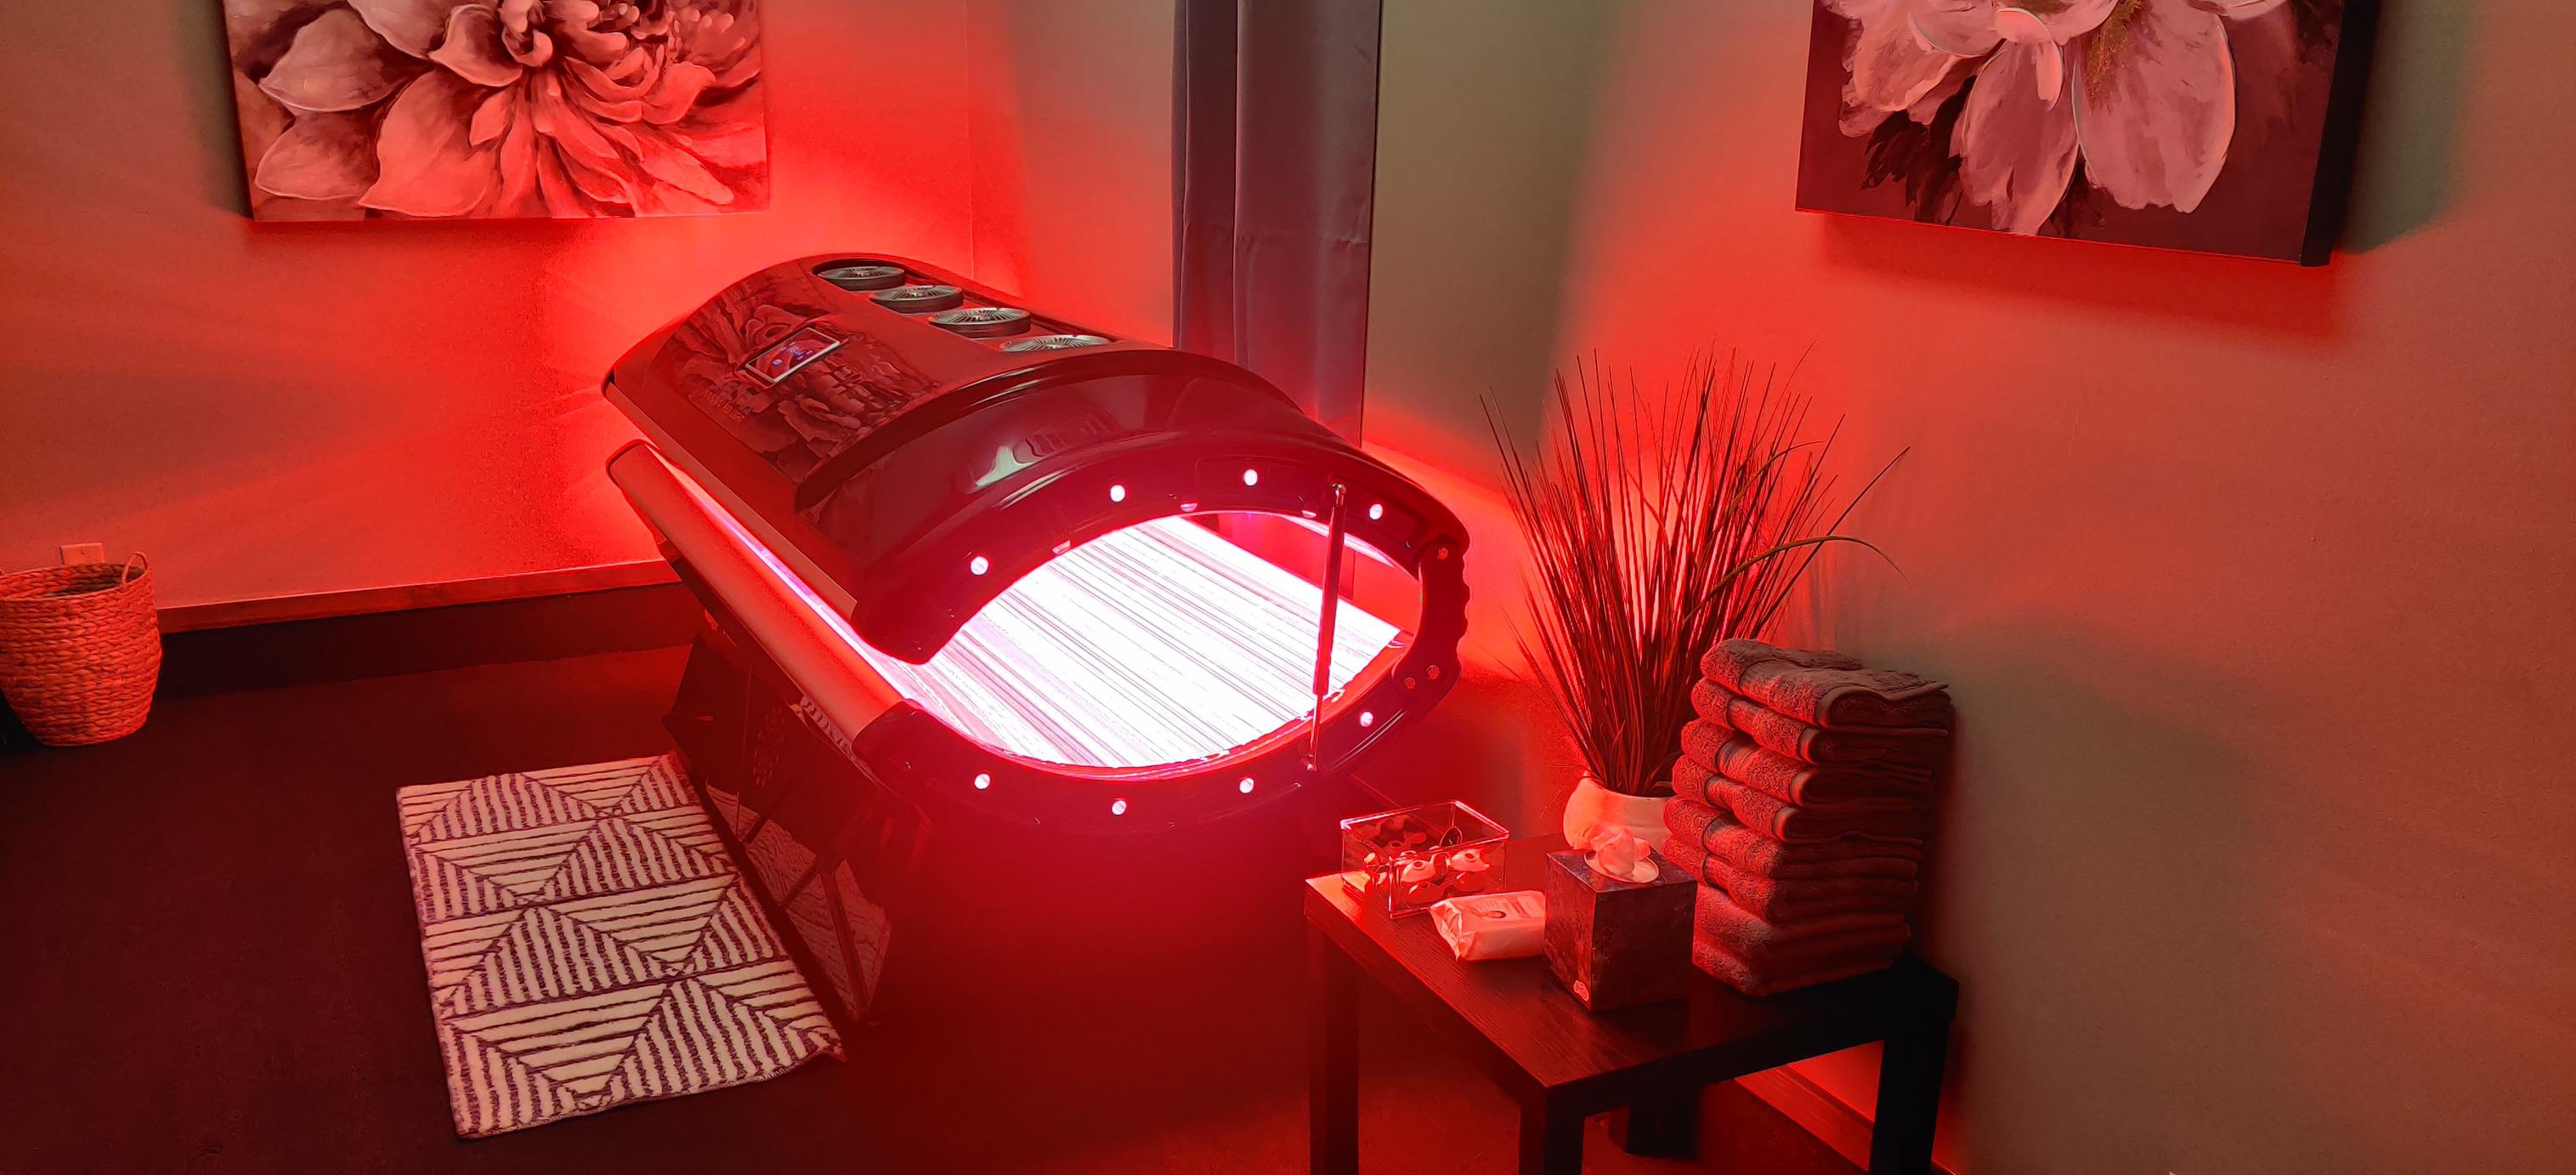 Medical grade red light therapy beds use Red Light and Near-Infrared (NIR) therapy. This therapy is a non-invasive, FDA Class II cleared treatment that harnesses the specific wavelengths of light to invigorate your body’s cells. The therapeutic red and NIR light wave-lengths, promote relaxation and provide relief for muscle and joint pain.